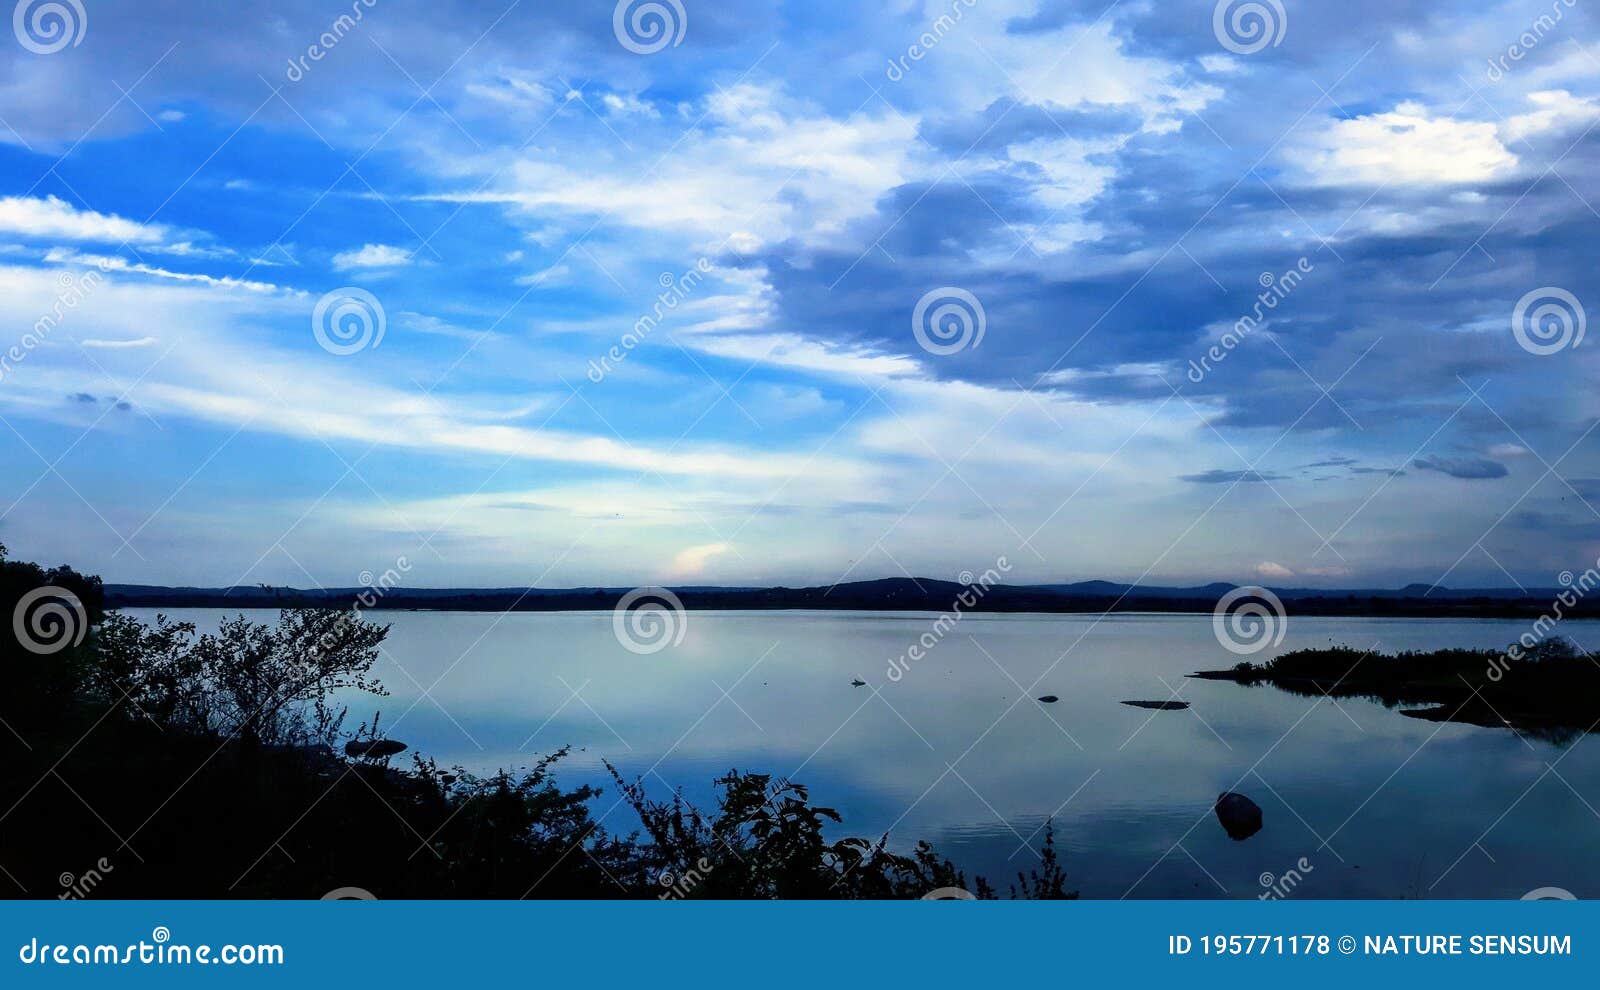 blue sky with peacefull landscape